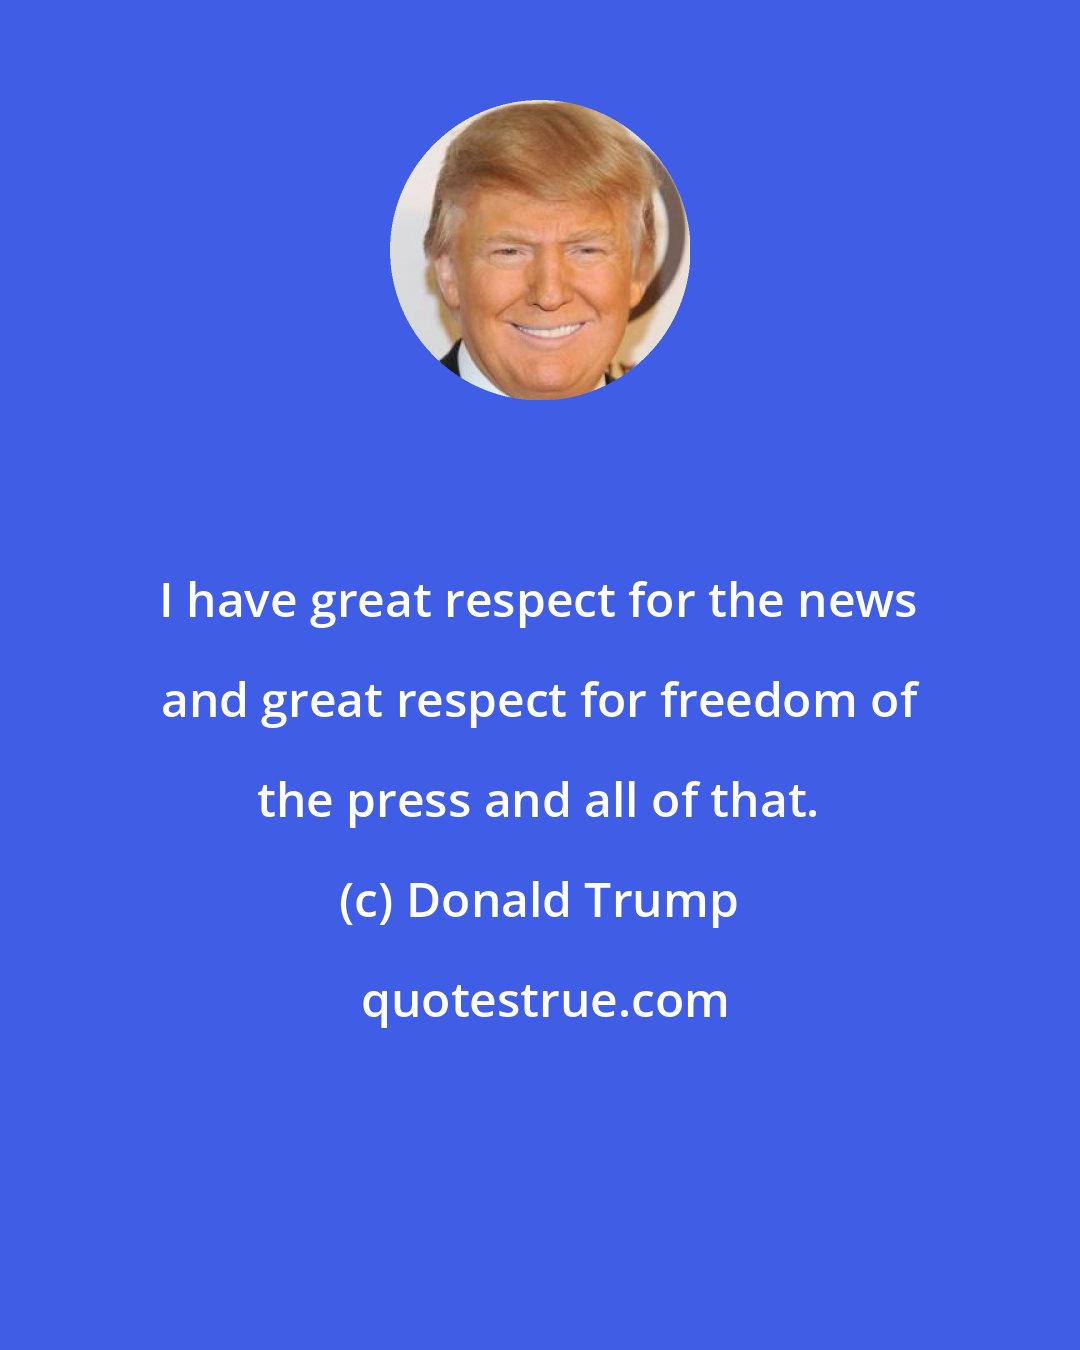 Donald Trump: I have great respect for the news and great respect for freedom of the press and all of that.